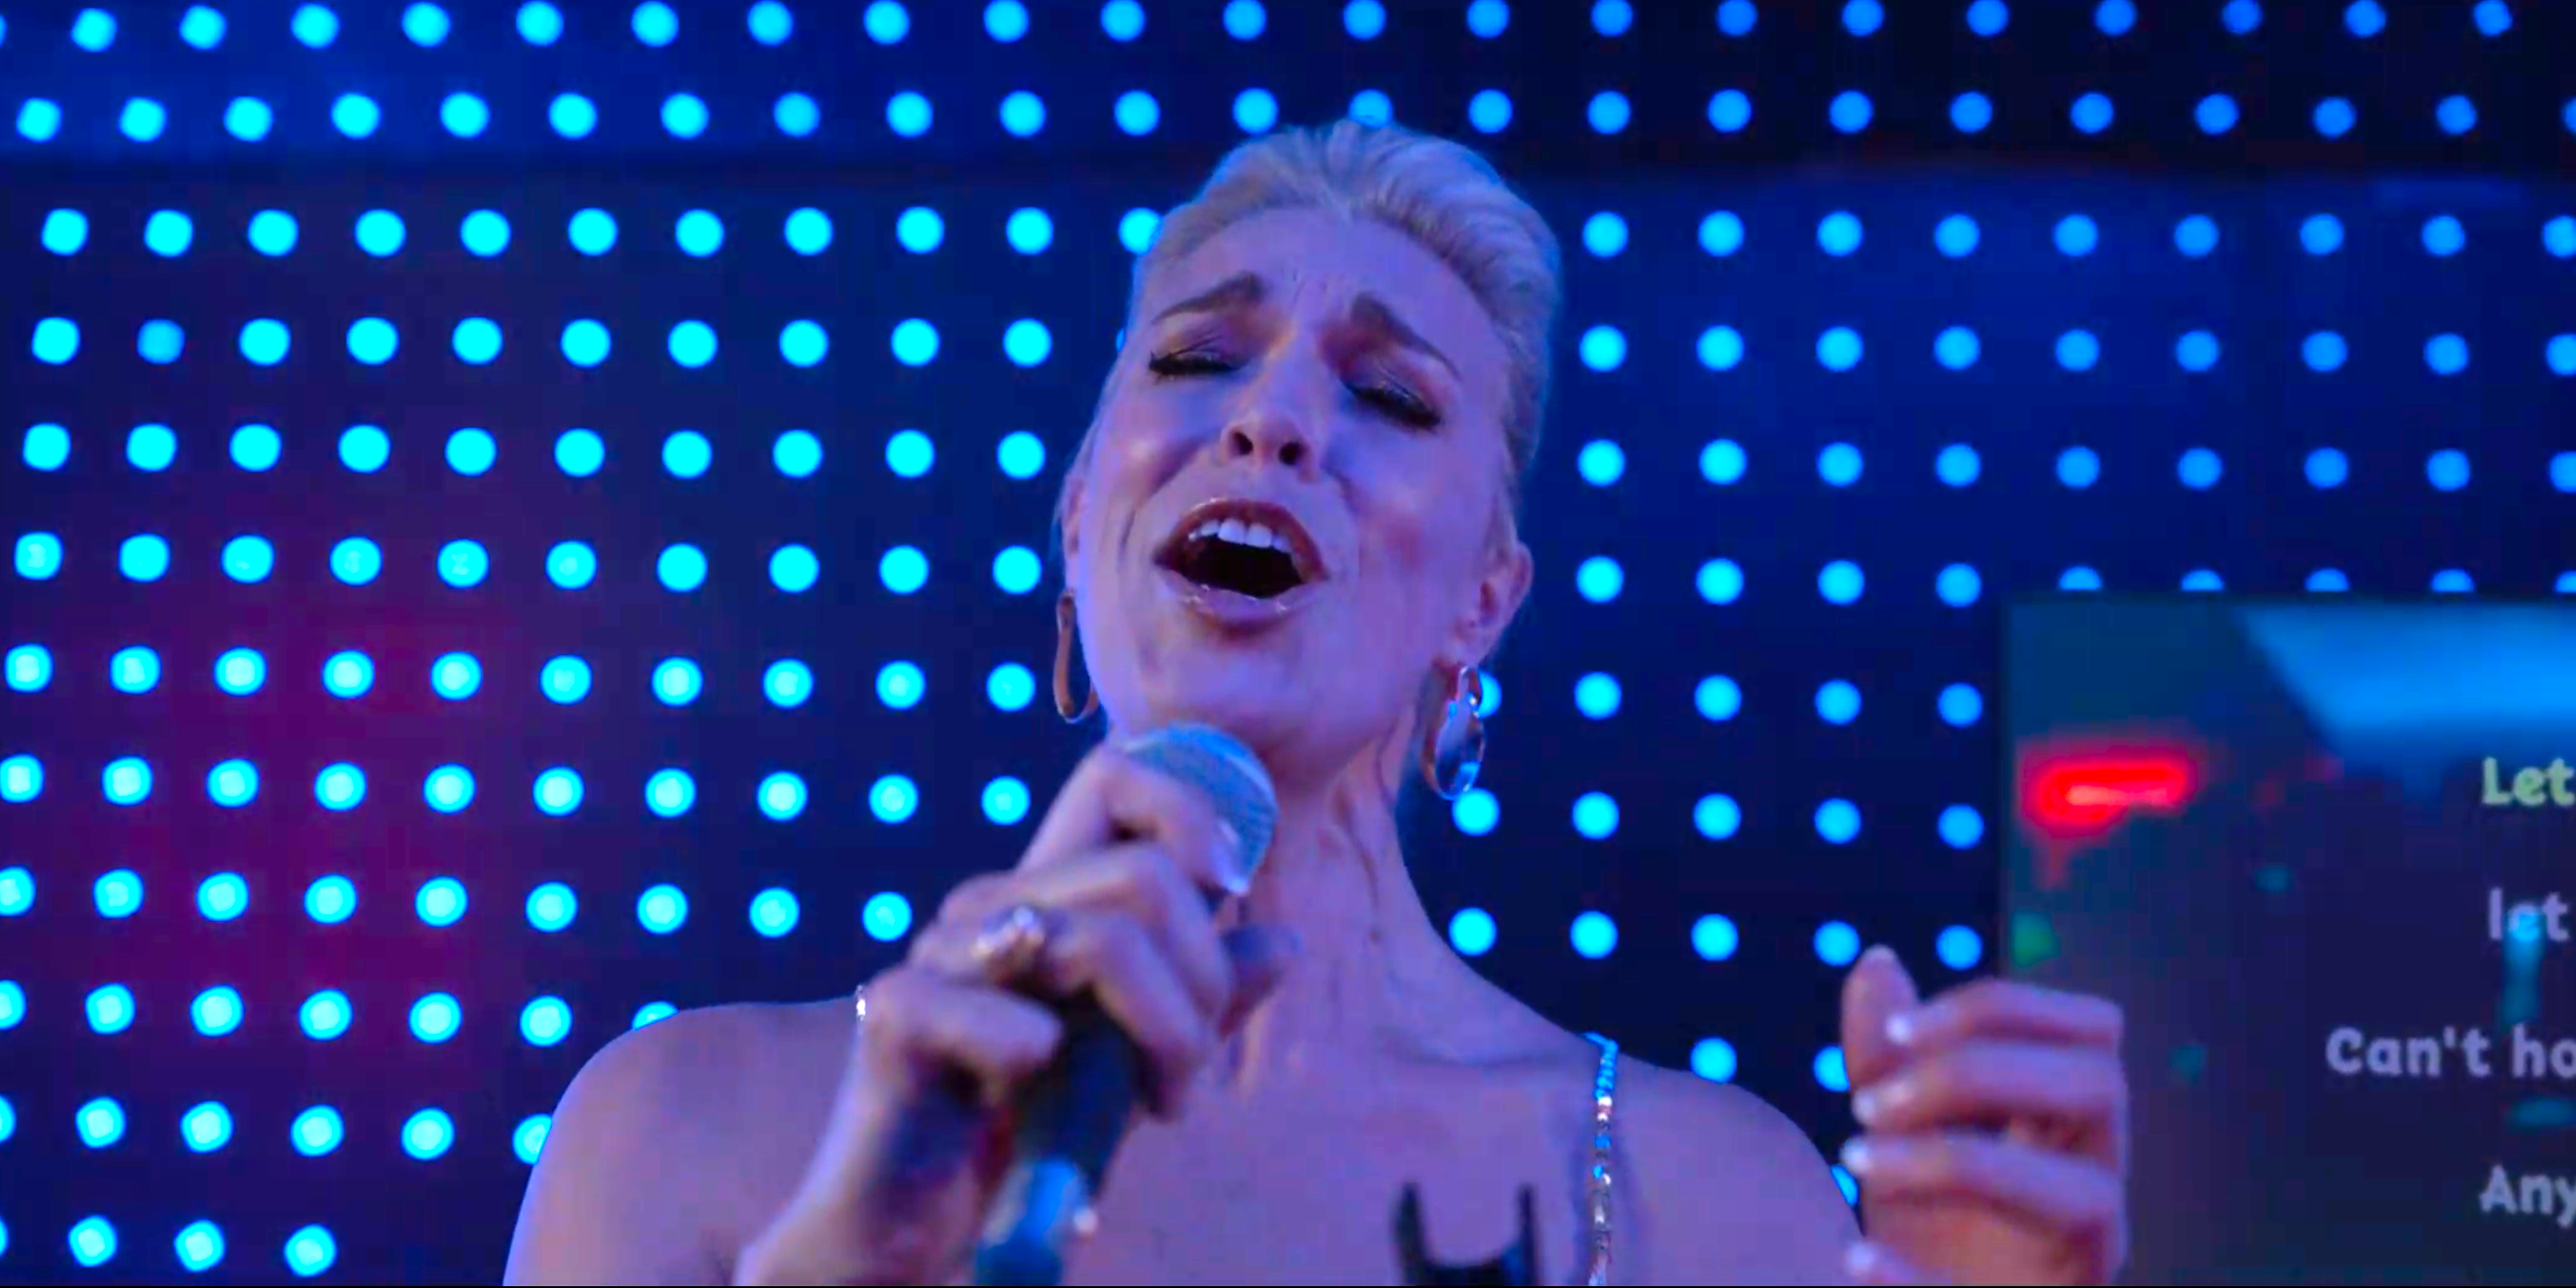 A blonde woman holds a microphone and sings in front of a blue stage